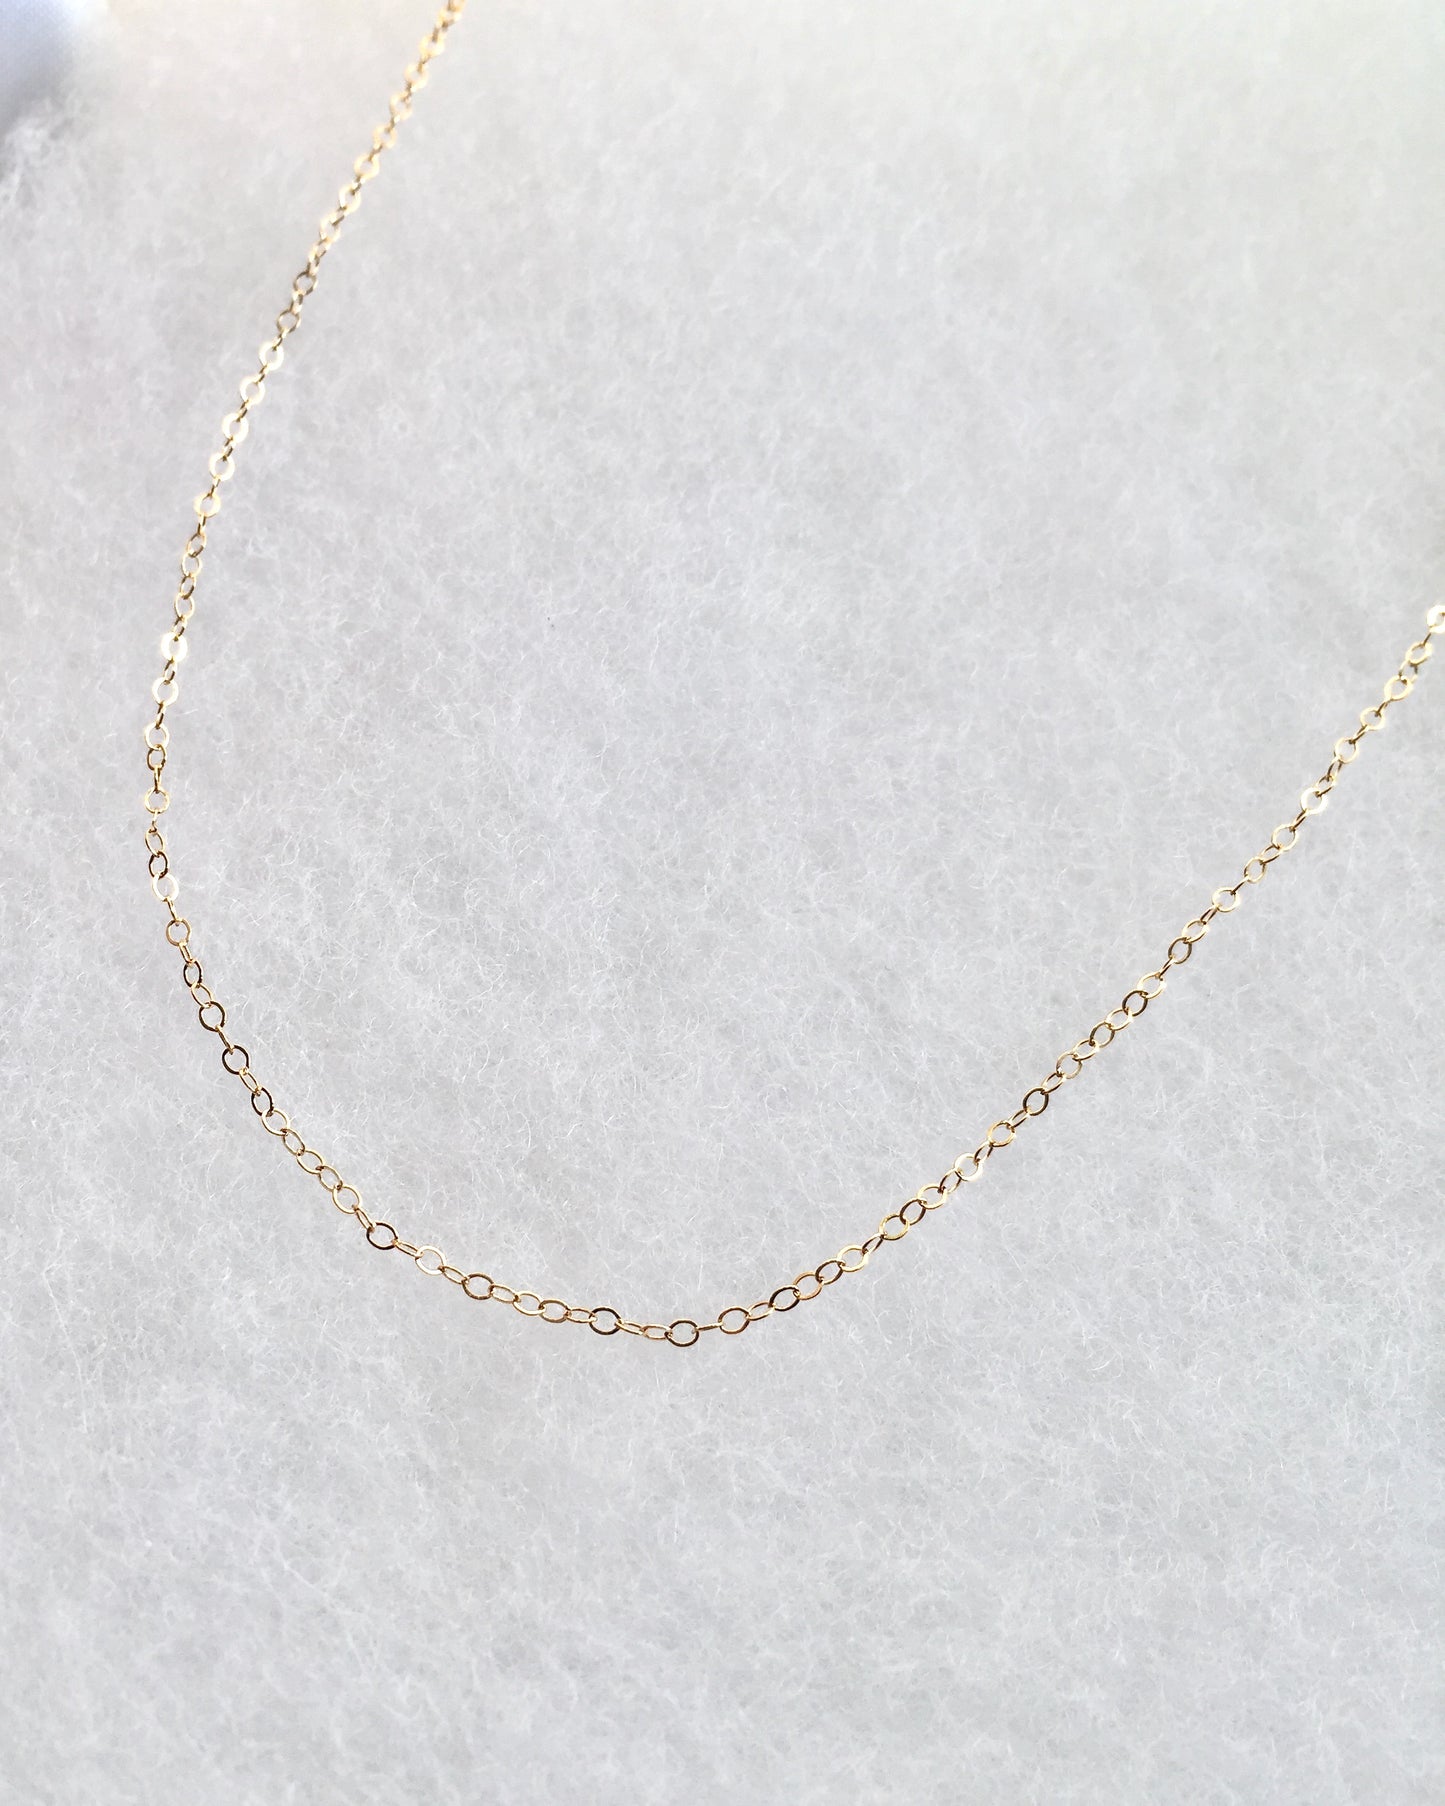 Simple Short Chain Necklace in Gold Filled or Sterling Silver | IB Jewelry